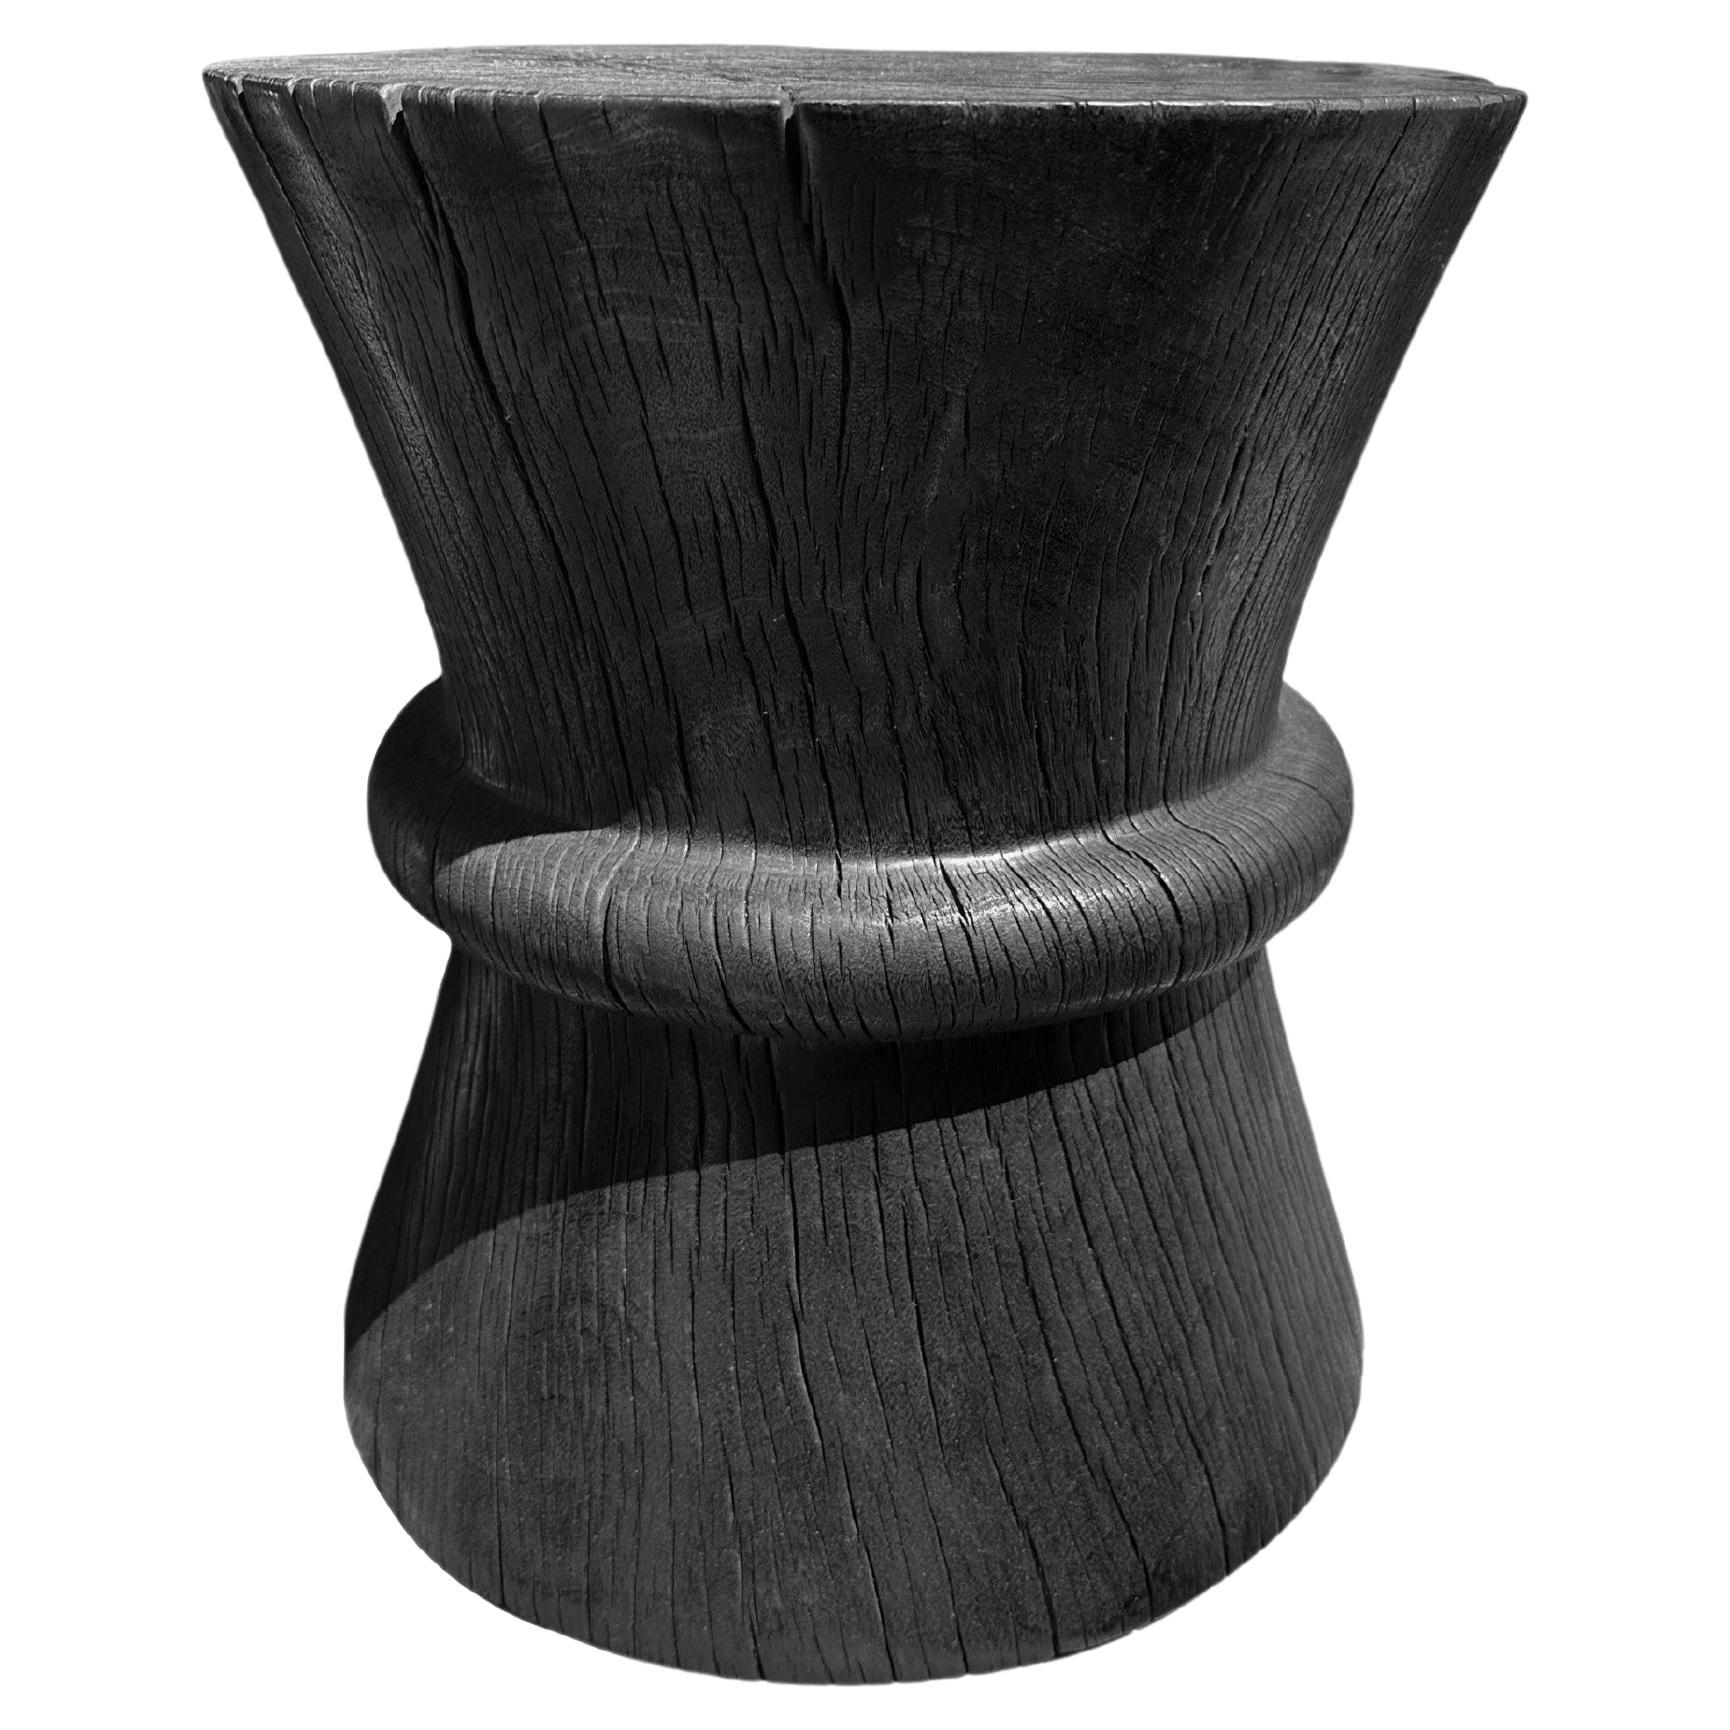 Sculptural Solid Tamarind Wood Table, Modern Organic, Burnt Finish For Sale